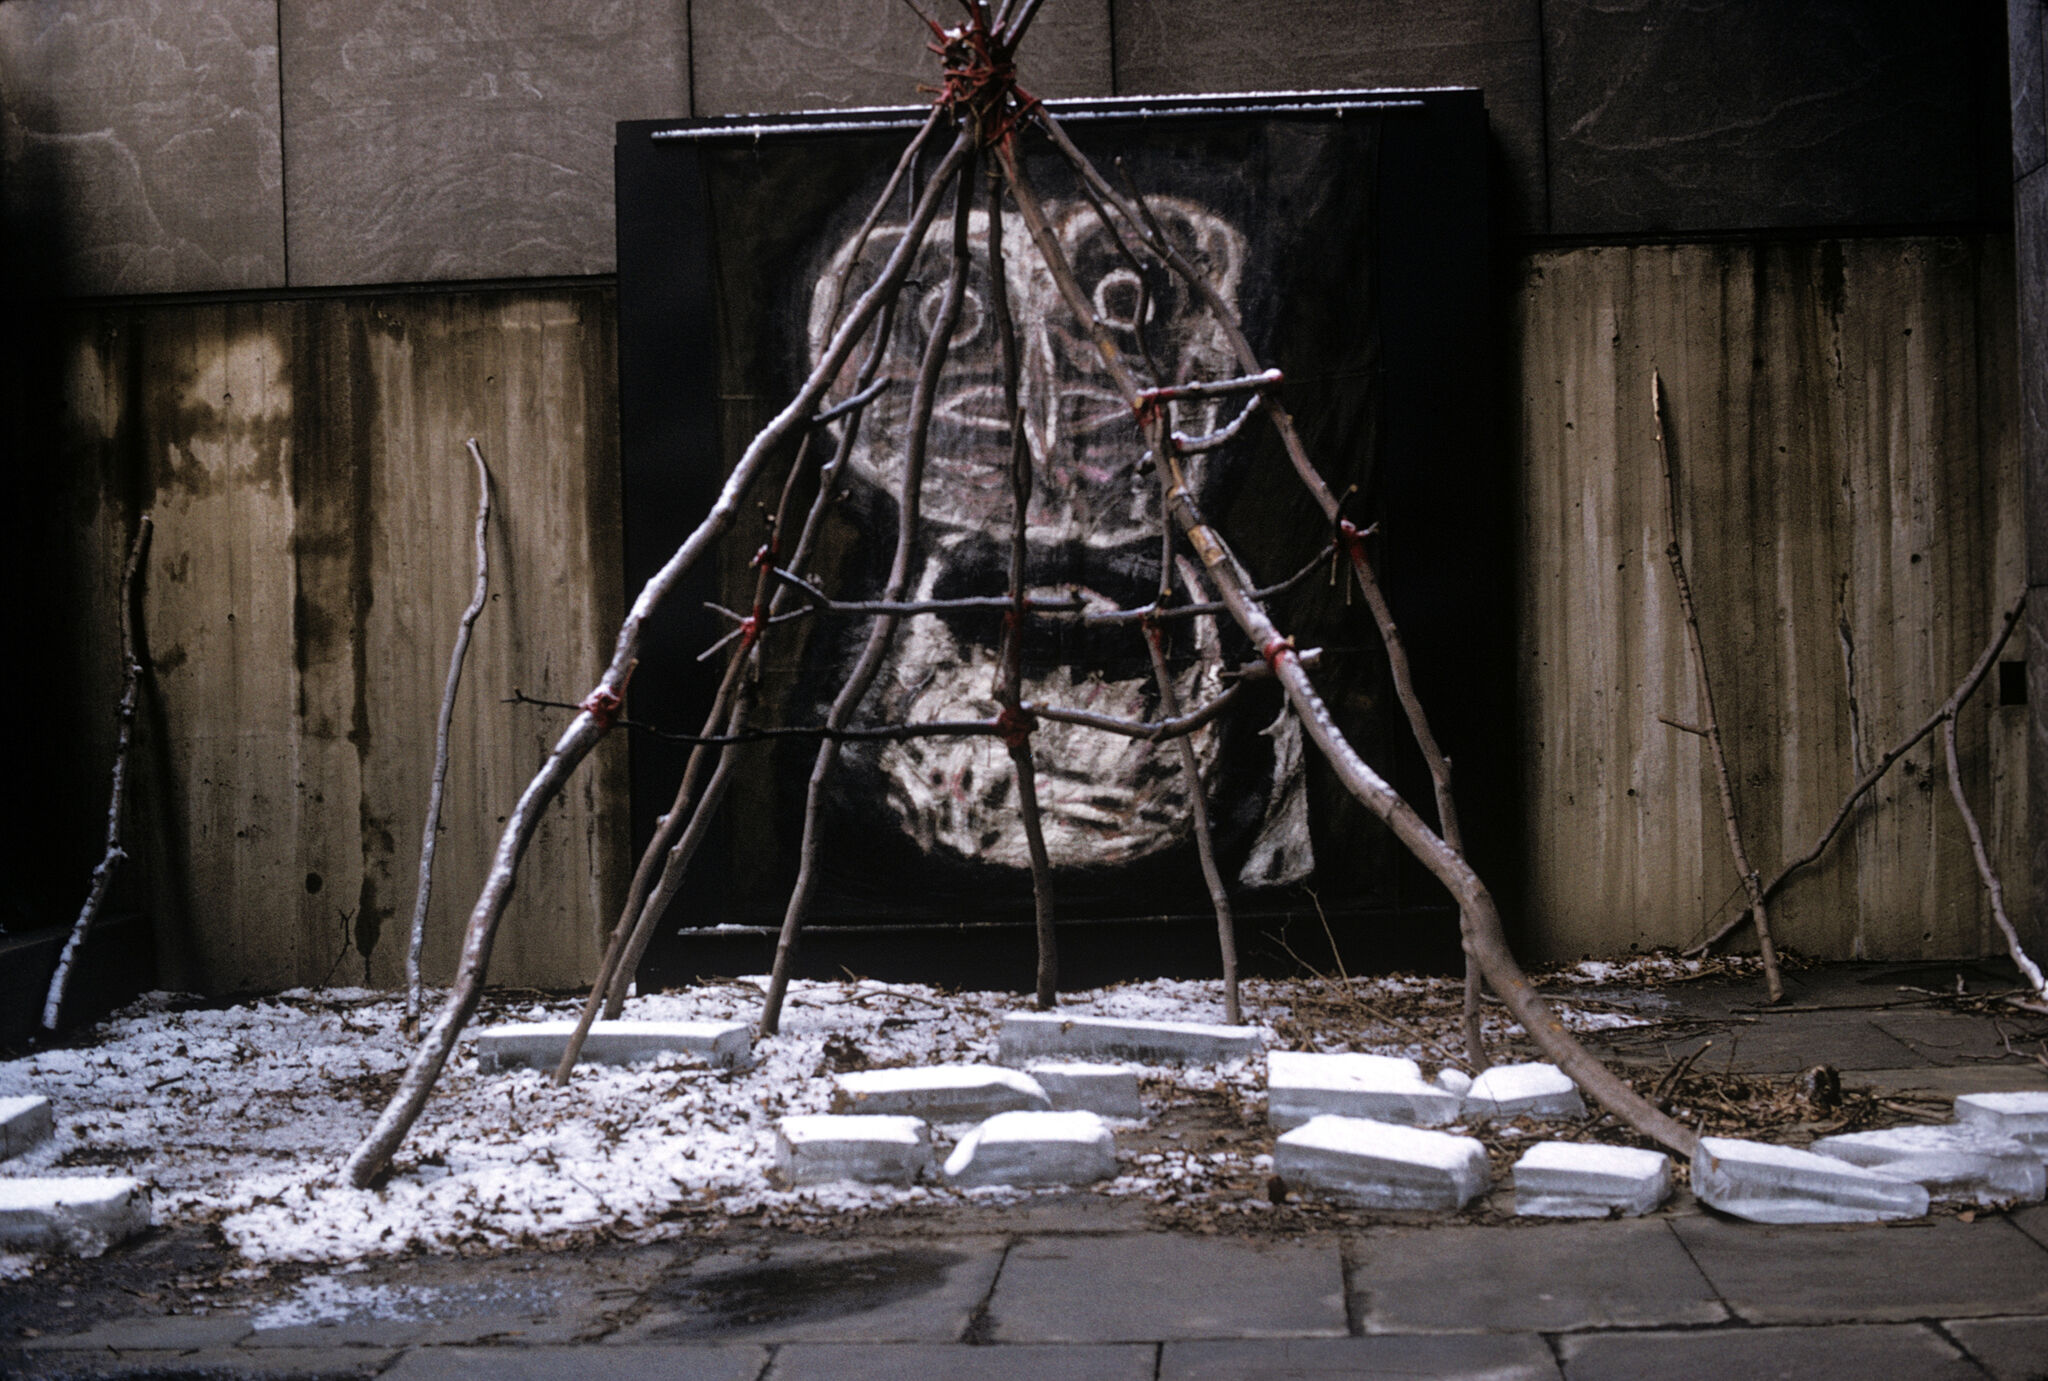 Tent of sticks and paving stones in front of an image of an owl-like figure.